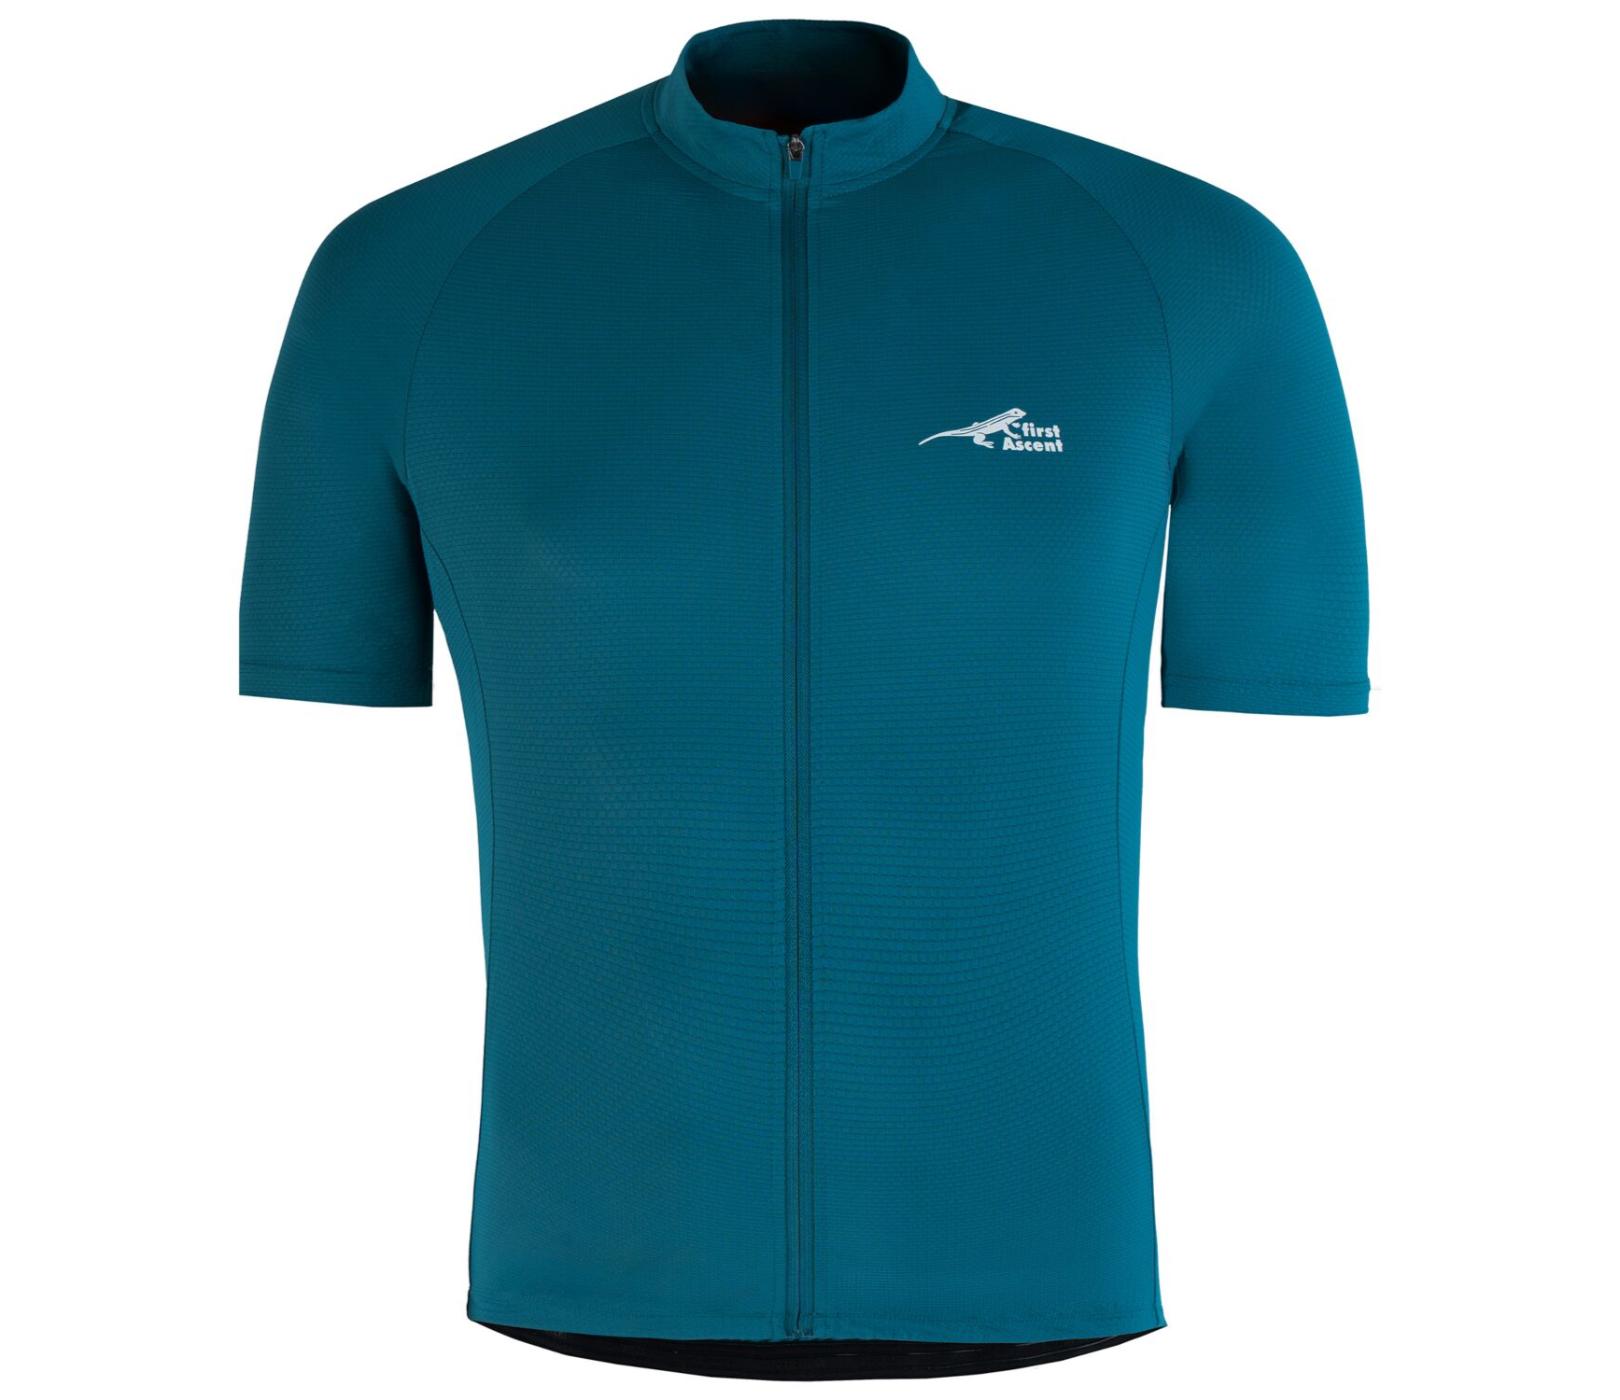 First Ascent Classic Core Men's Jersey 